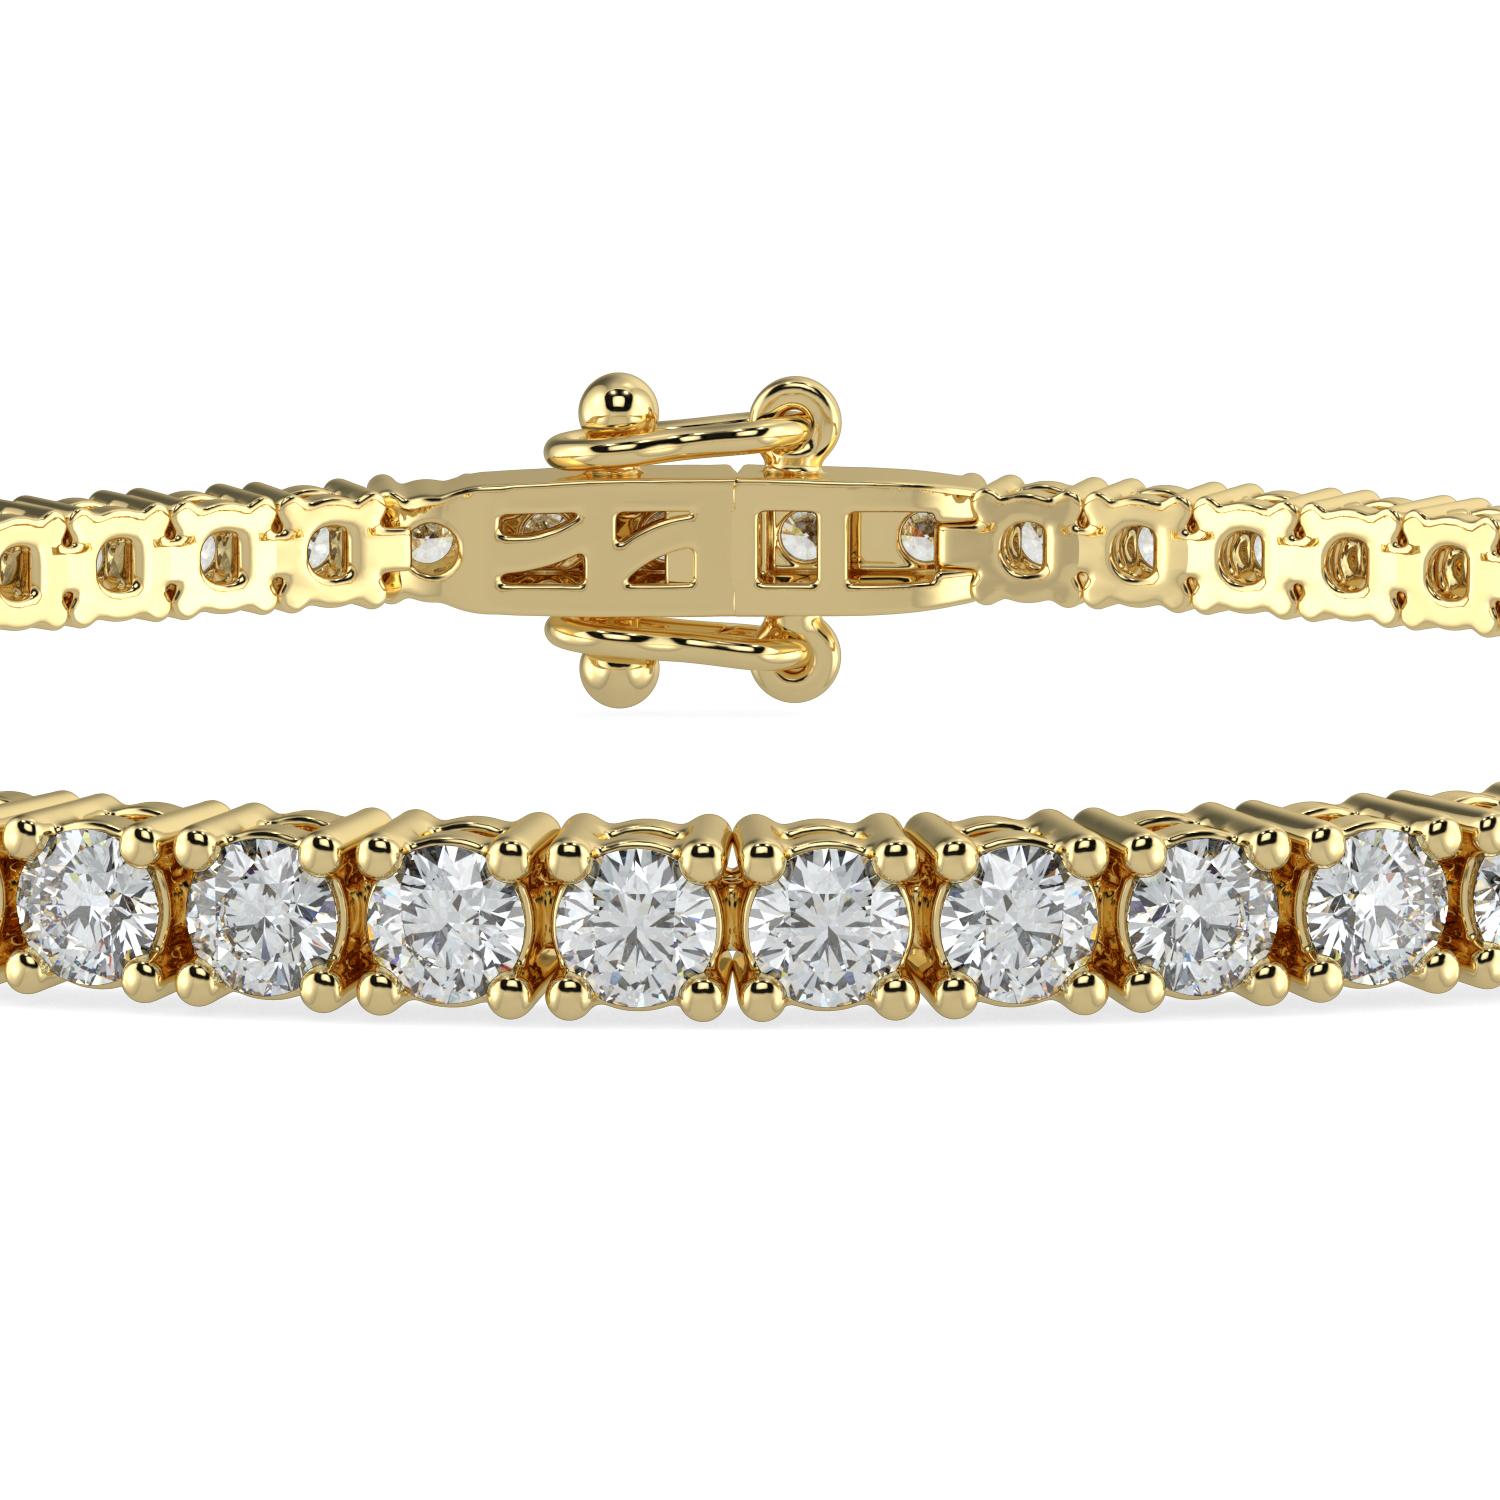 10.00 Carat Round Cut GH-I1 Natural Diamond Classic Tennis Bracelet 4 Prong 14K Yellow Gold for Women

Specification
Brand: AAMIAA
Length: 7 Inches 
Color: GH
Carat Weight:10.00CTW
Clarity: I1

LUXURIOUS AND LASTING- Our bracelets are a luxurious